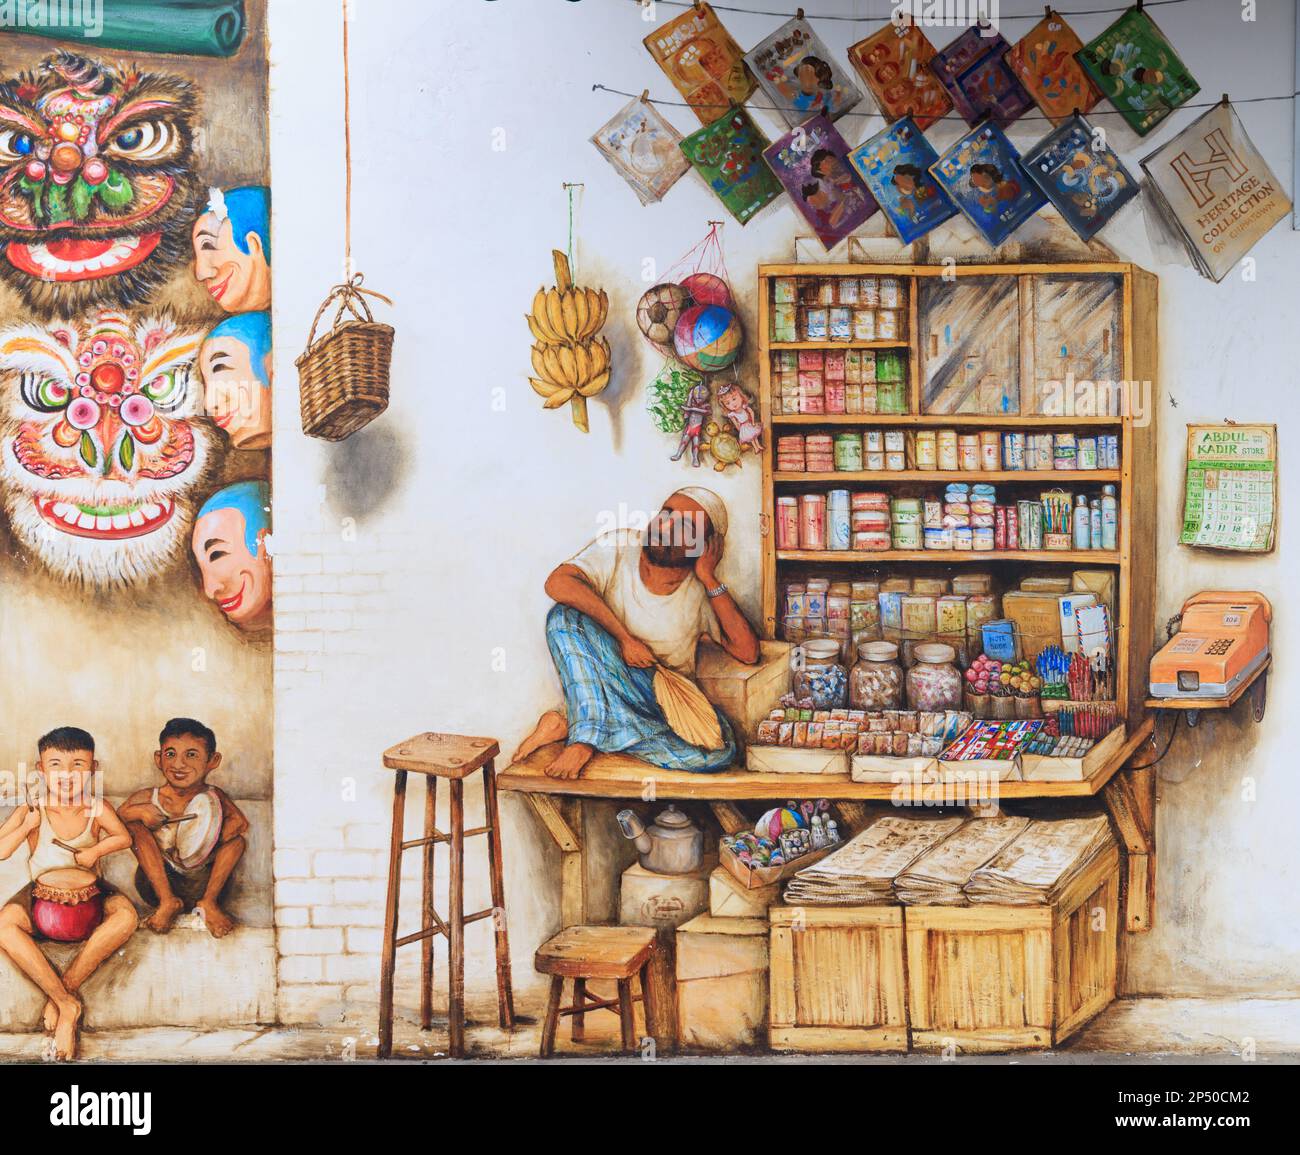 Mural of a 'Mamak shop' in Mohamed Ali Lane, Chinatown, Singapore by Yip Yew Chong. Stock Photo